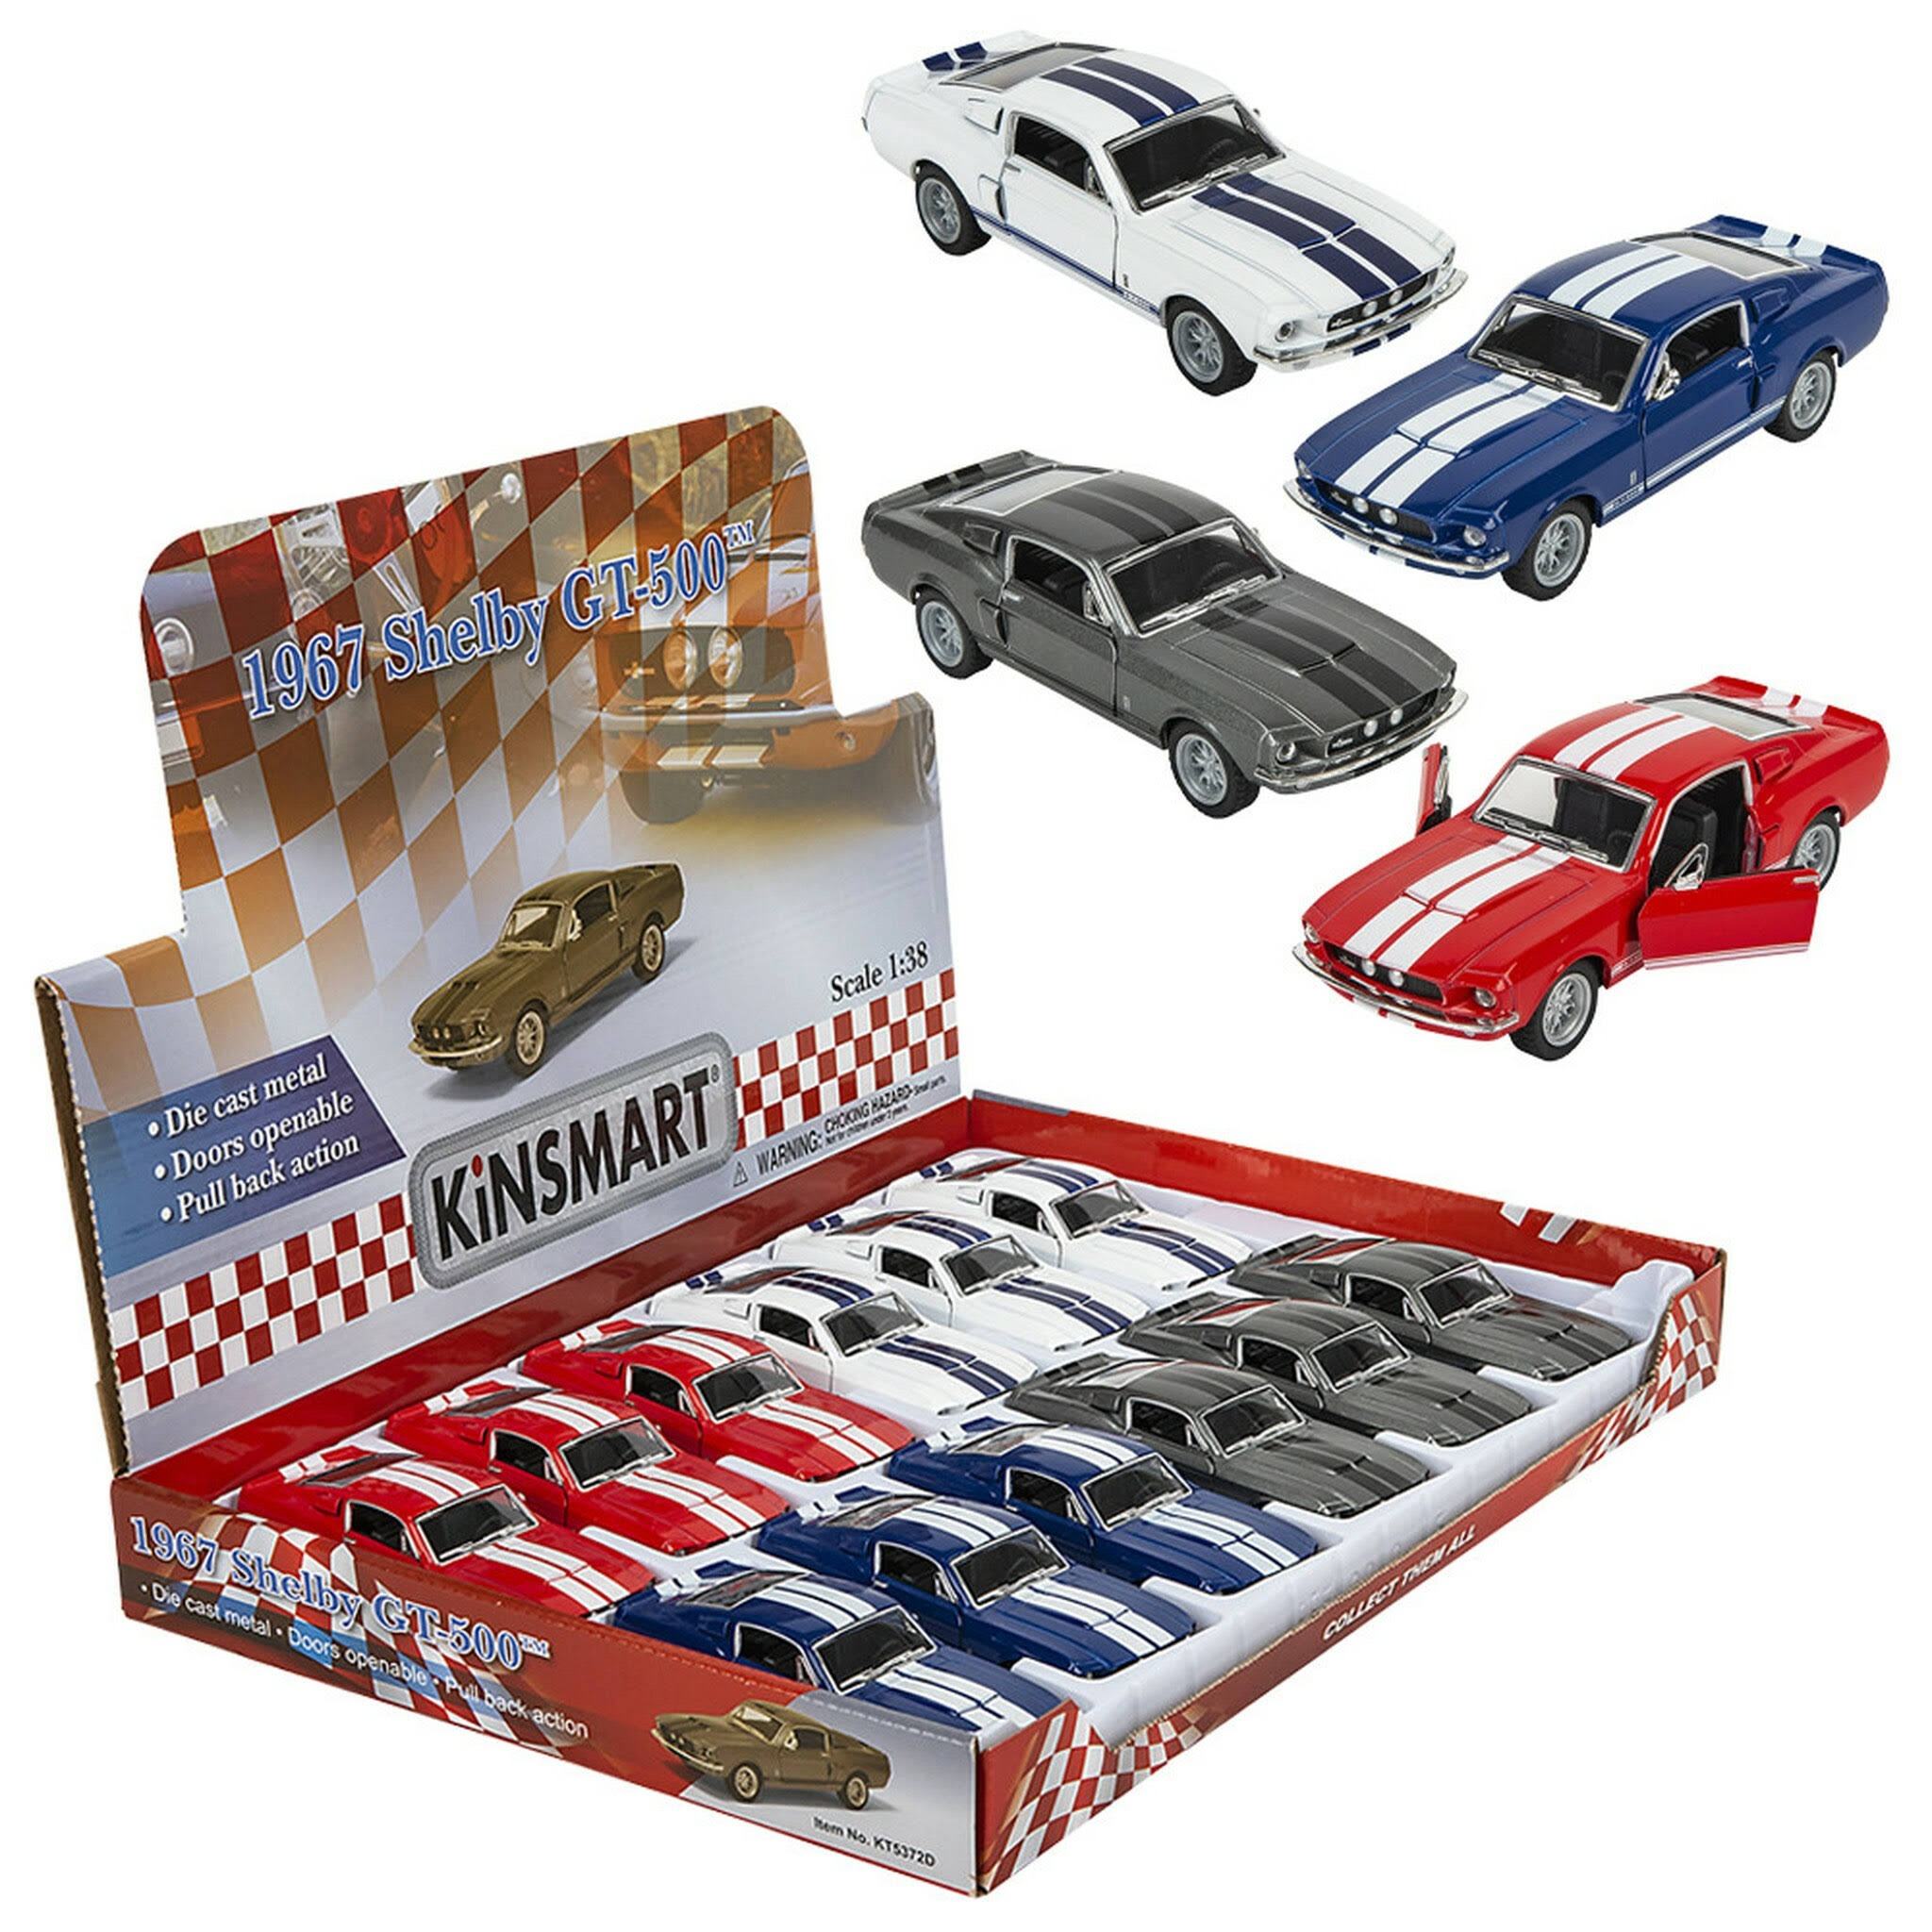 5" Diecast 1967 Shelby GT500